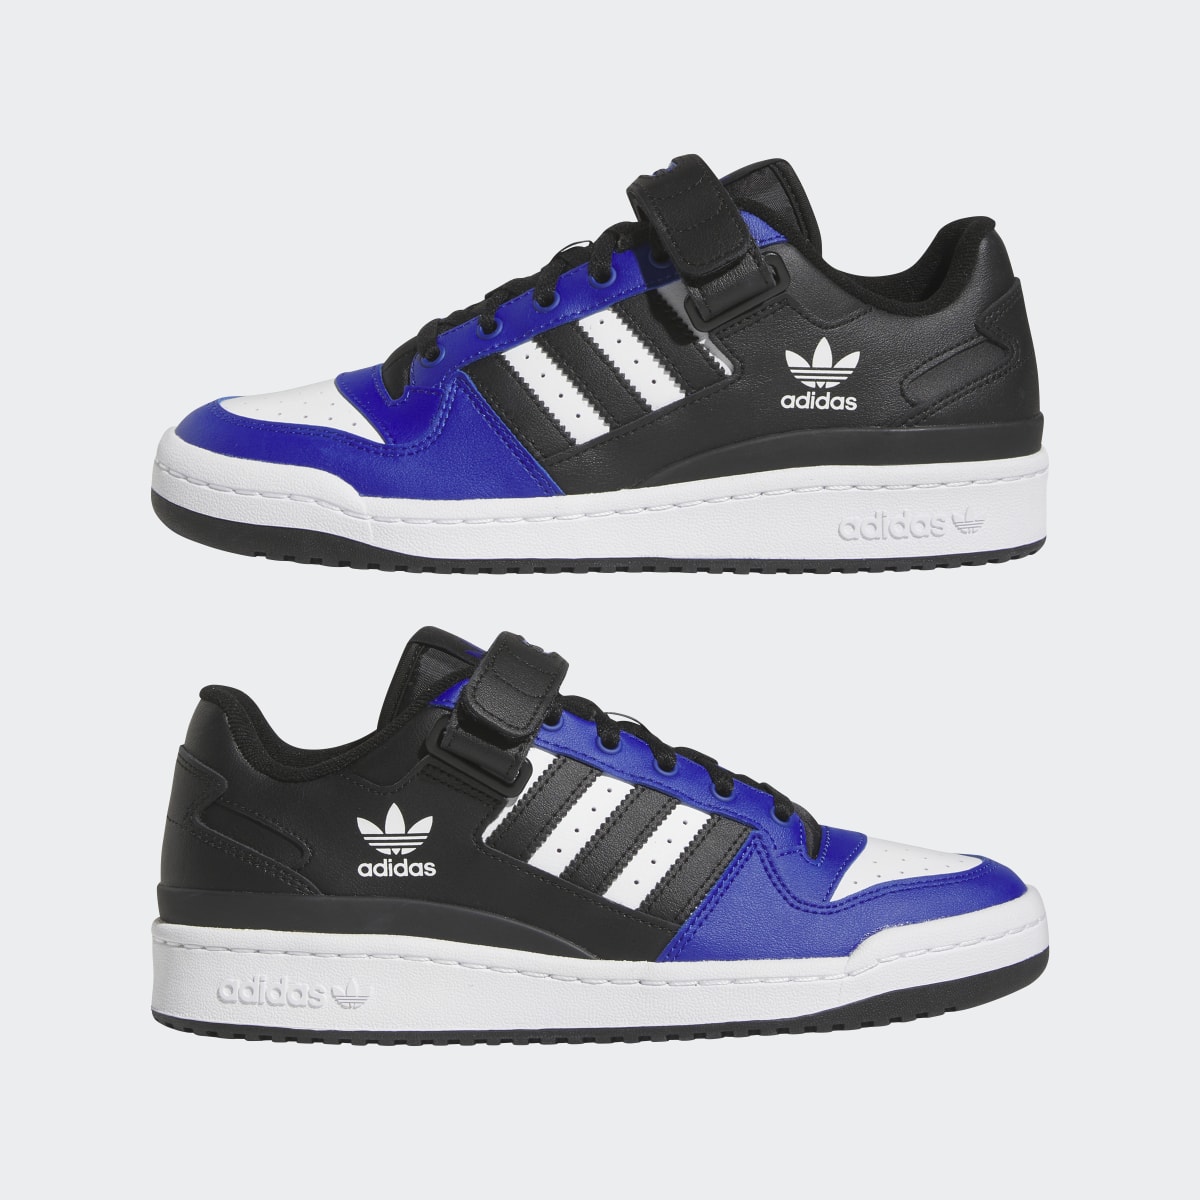 Adidas Forum Low Shoes. 8